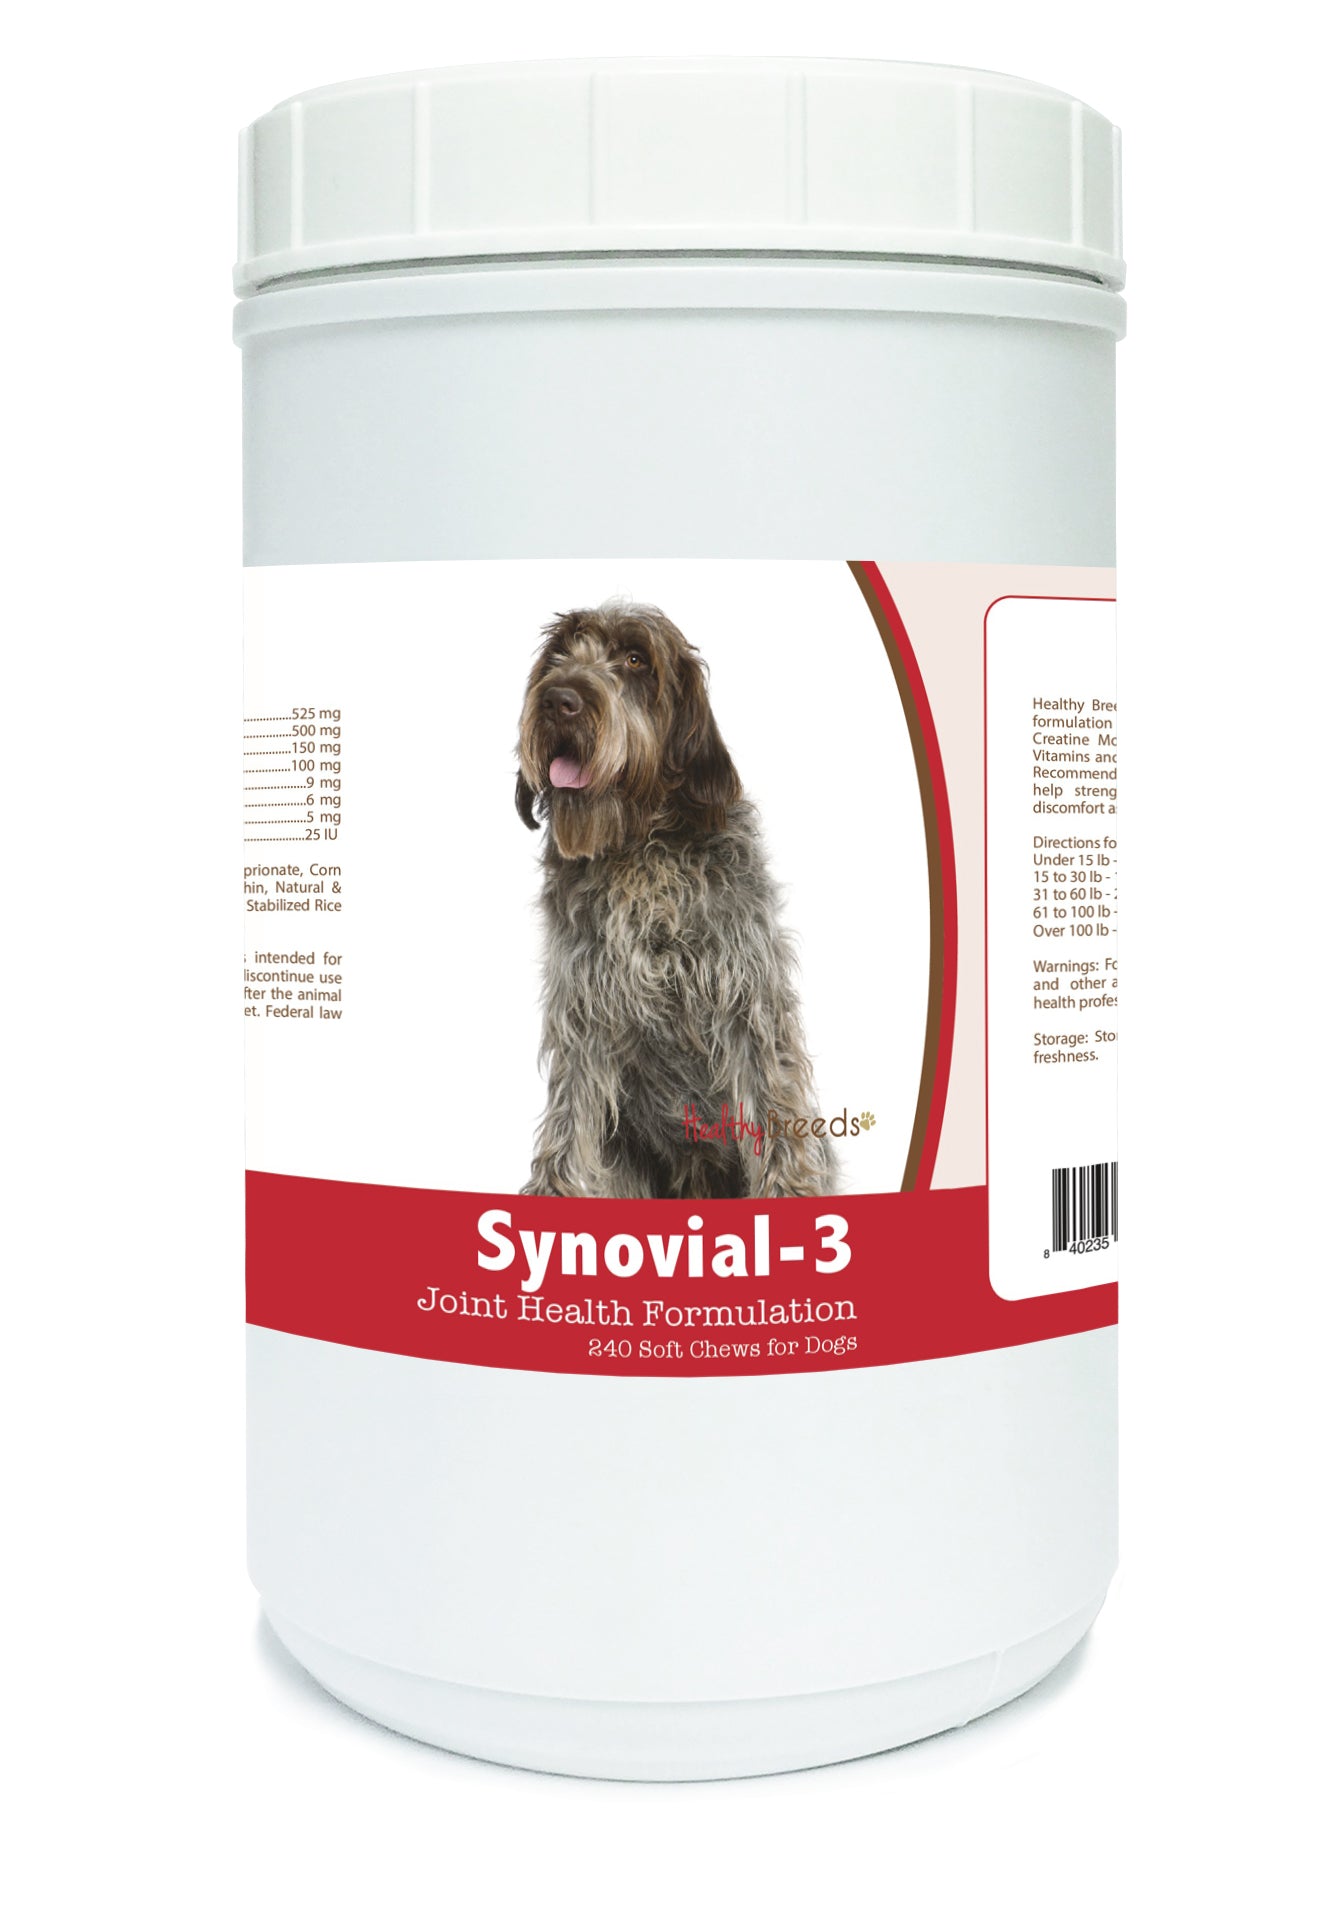 Wirehaired Pointing Griffon Synovial-3 Joint Health Formulation Soft Chews 240 Count